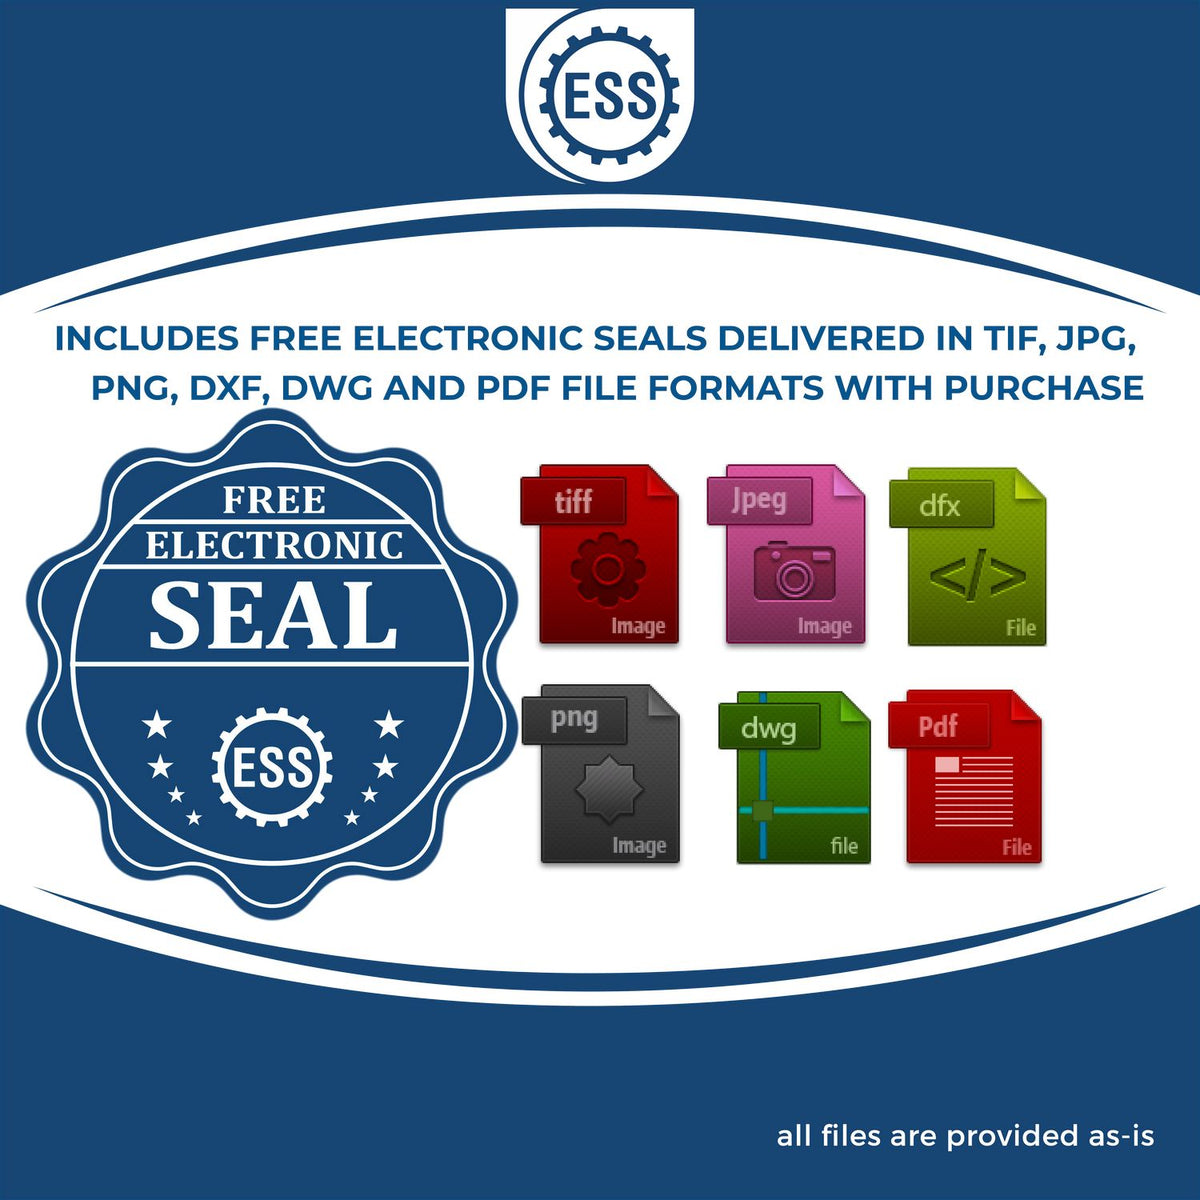 An infographic for the free electronic seal for the Heavy-Duty Connecticut Rectangular Notary Stamp illustrating the different file type icons such as DXF, DWG, TIF, JPG and PNG.